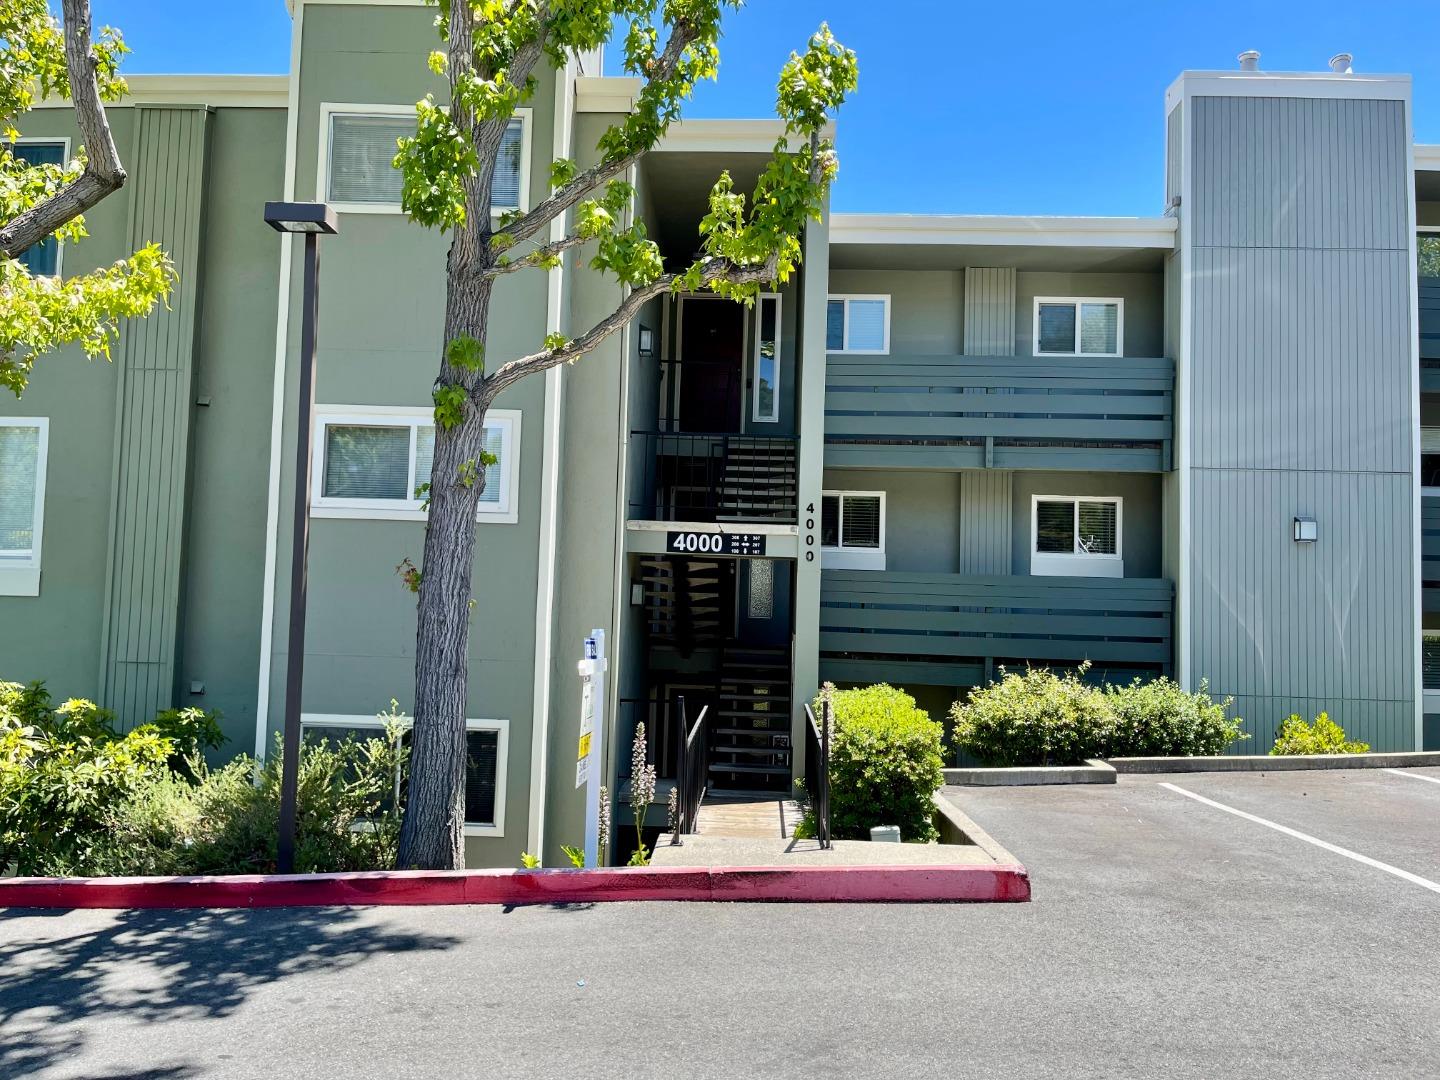 Great location! 2 Bedroom Condo in desirable Farm Hill Vista Community. New carpeting, freshly painted, ceiling fan, and in-unit laundry. Patio deck, 1 carport with storage space. Enjoy the community swimming pool, and clubhouse. Conveniently located minutes from downtown Redwood City, shopping, and restaurants. Easy access to I-280.